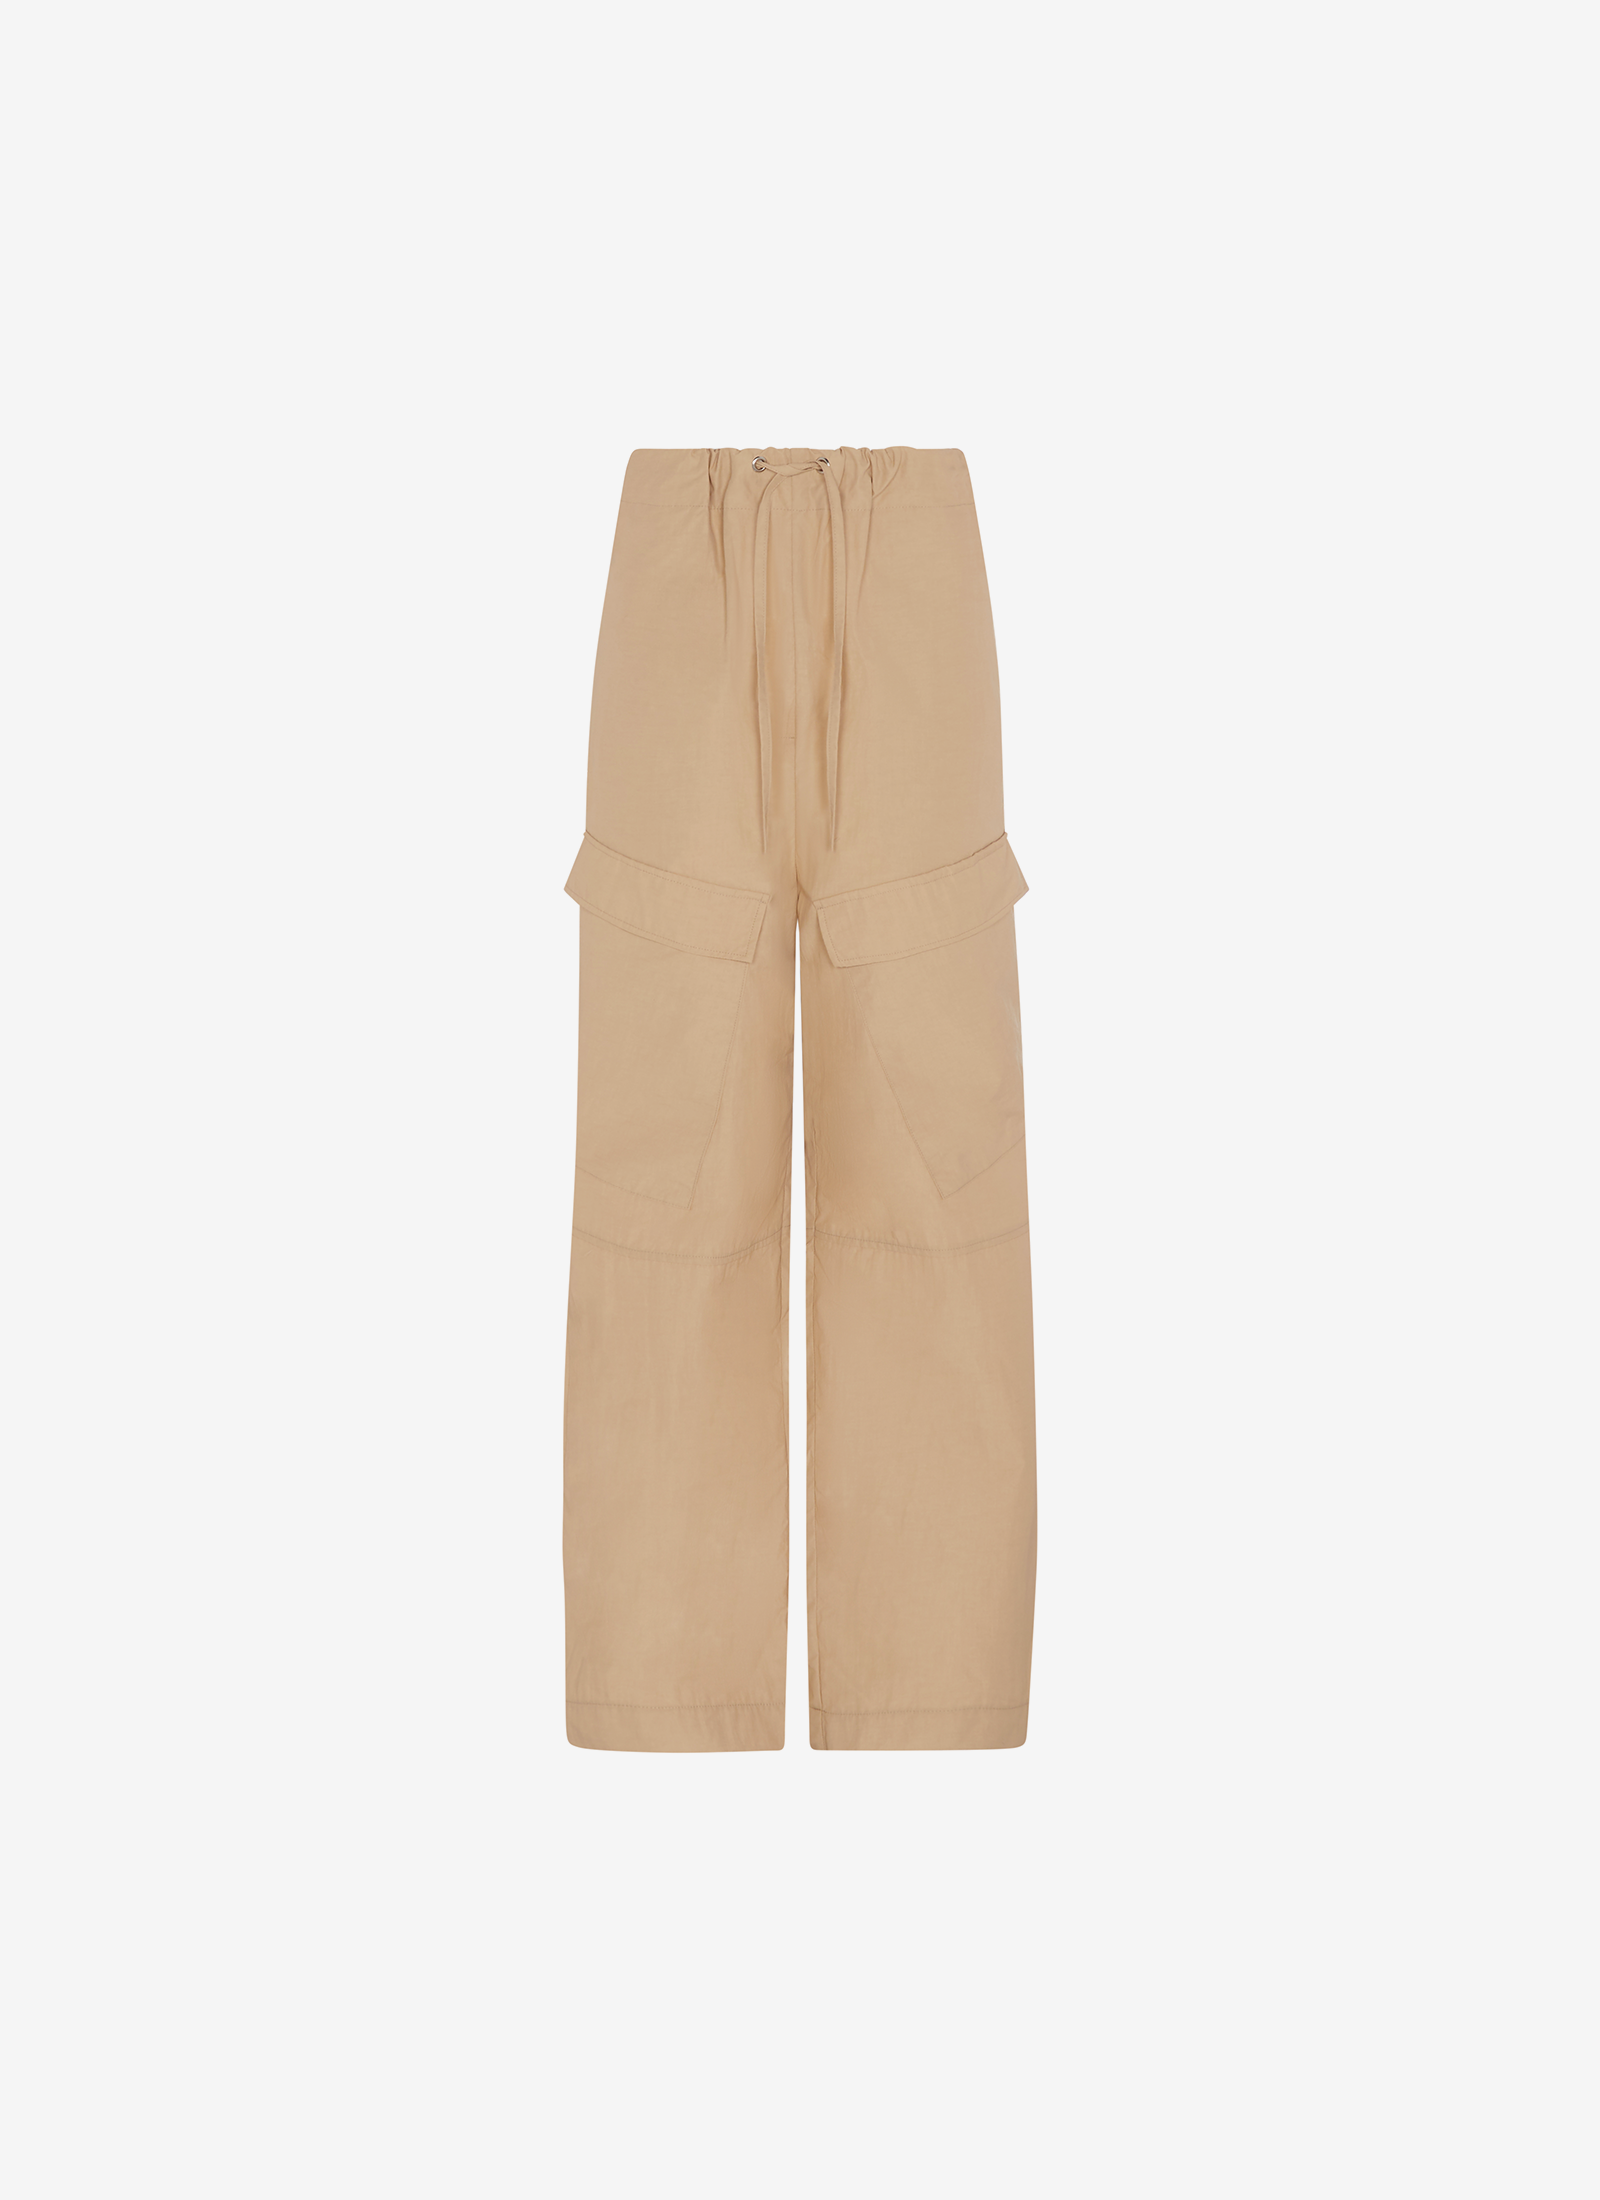 Herb Pant in Sand Washed Cotton